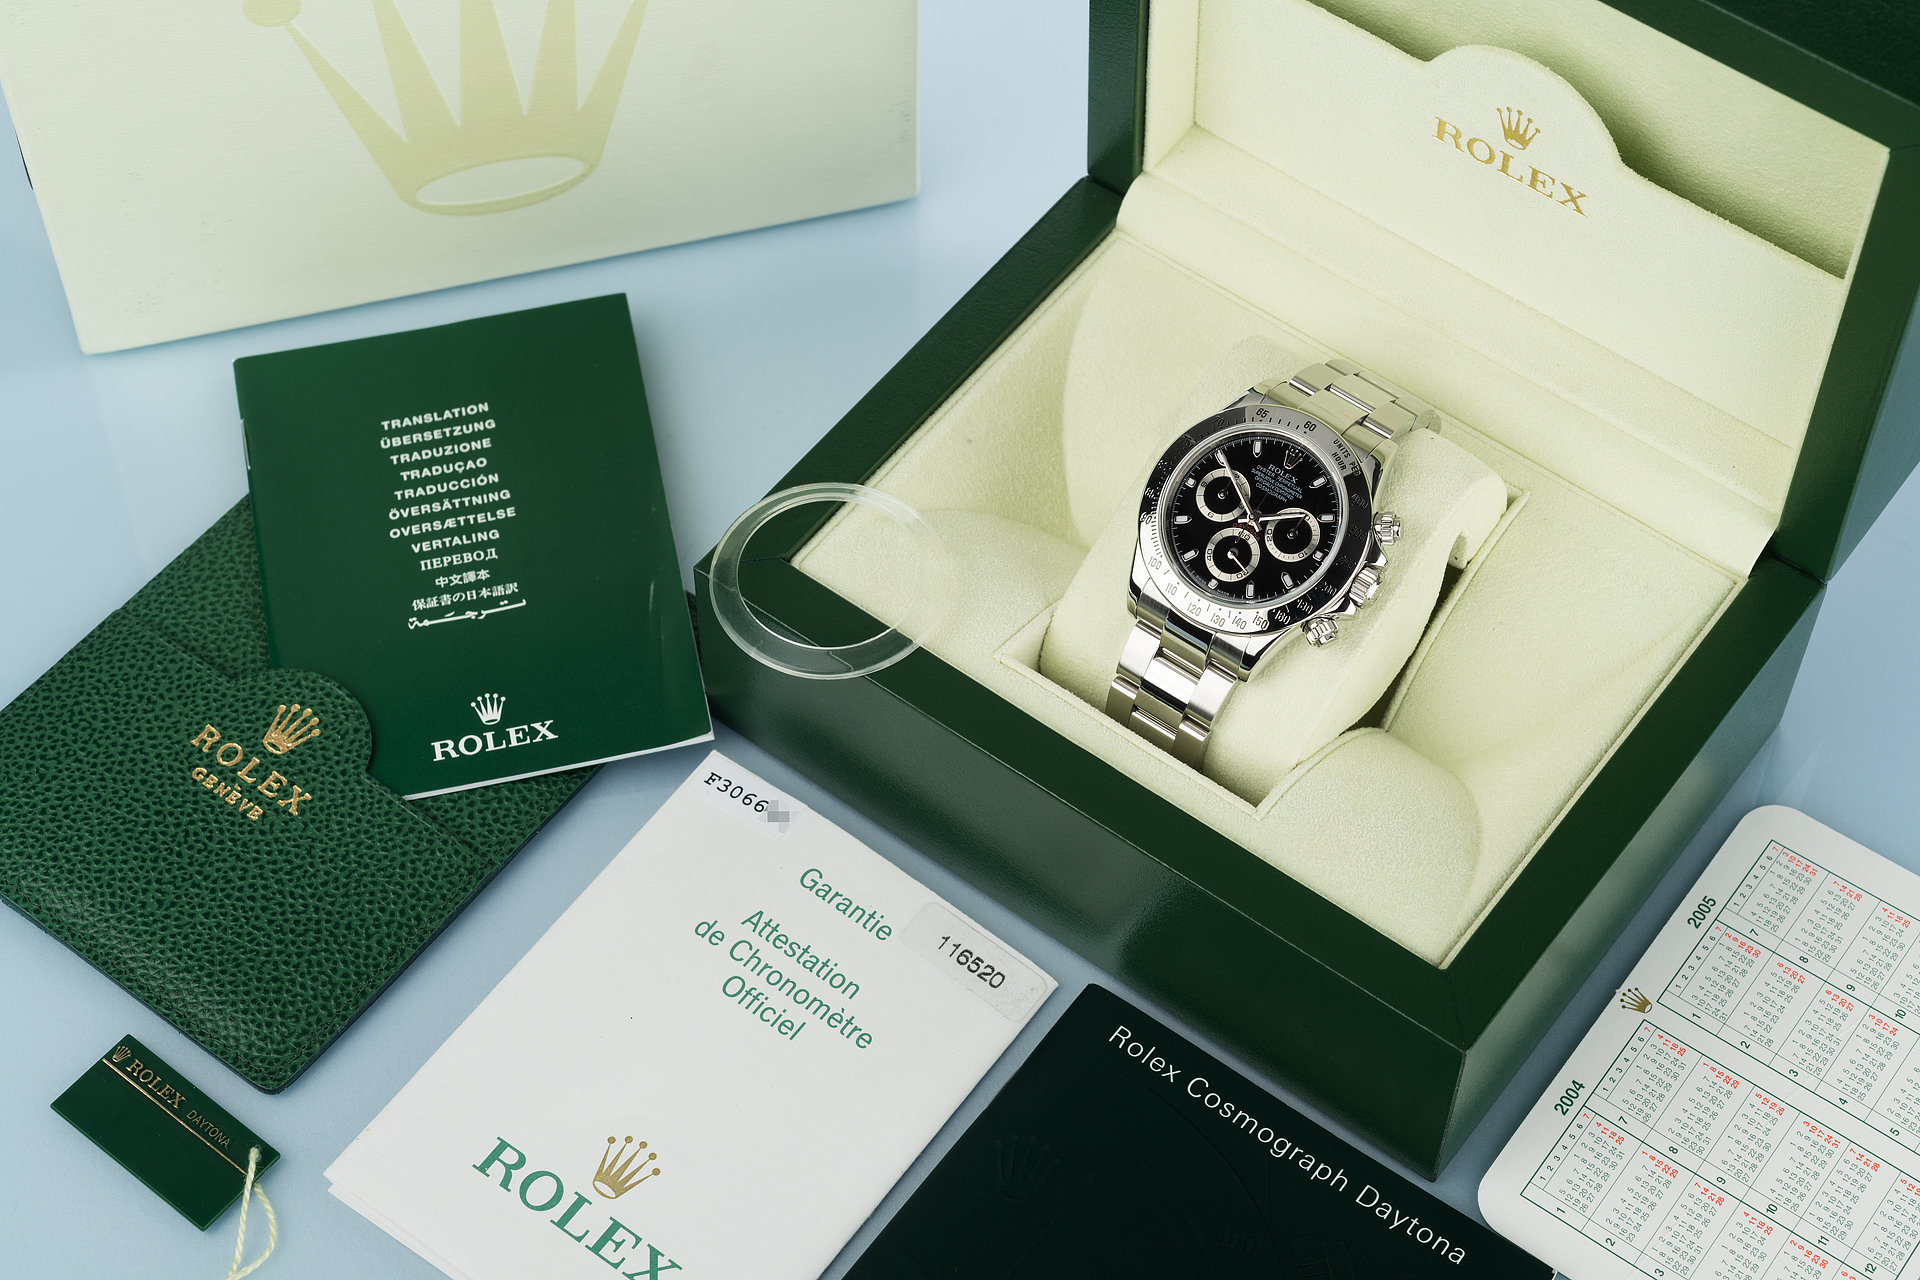 Rolex Cosmograph Daytona Watches | ref 116520 | Early 'Thin Hands ...